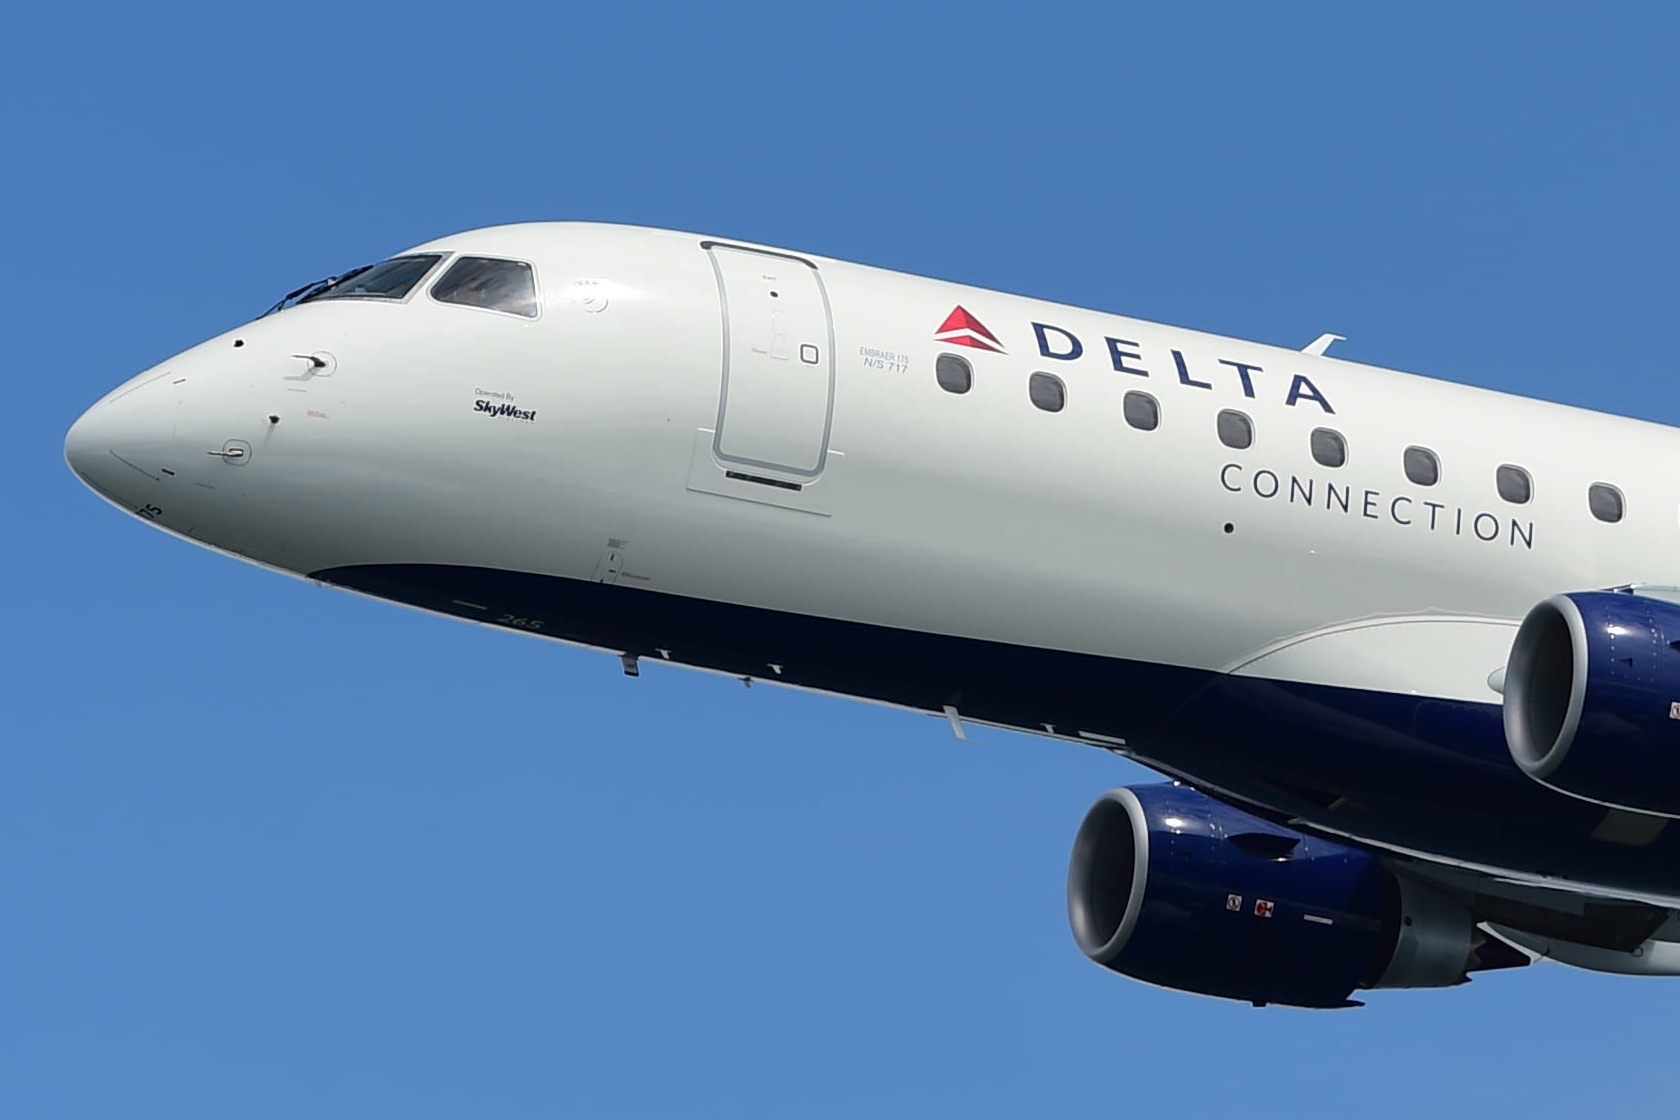 SkyWest has ordered 16 new Embraer E175 jets which will fly exclusively with Delta under a Capacity Purchase Agreement (CPA), adding to the 71 E175 jets SkyWest already operates for the U.S. airline. Click to enlarge.